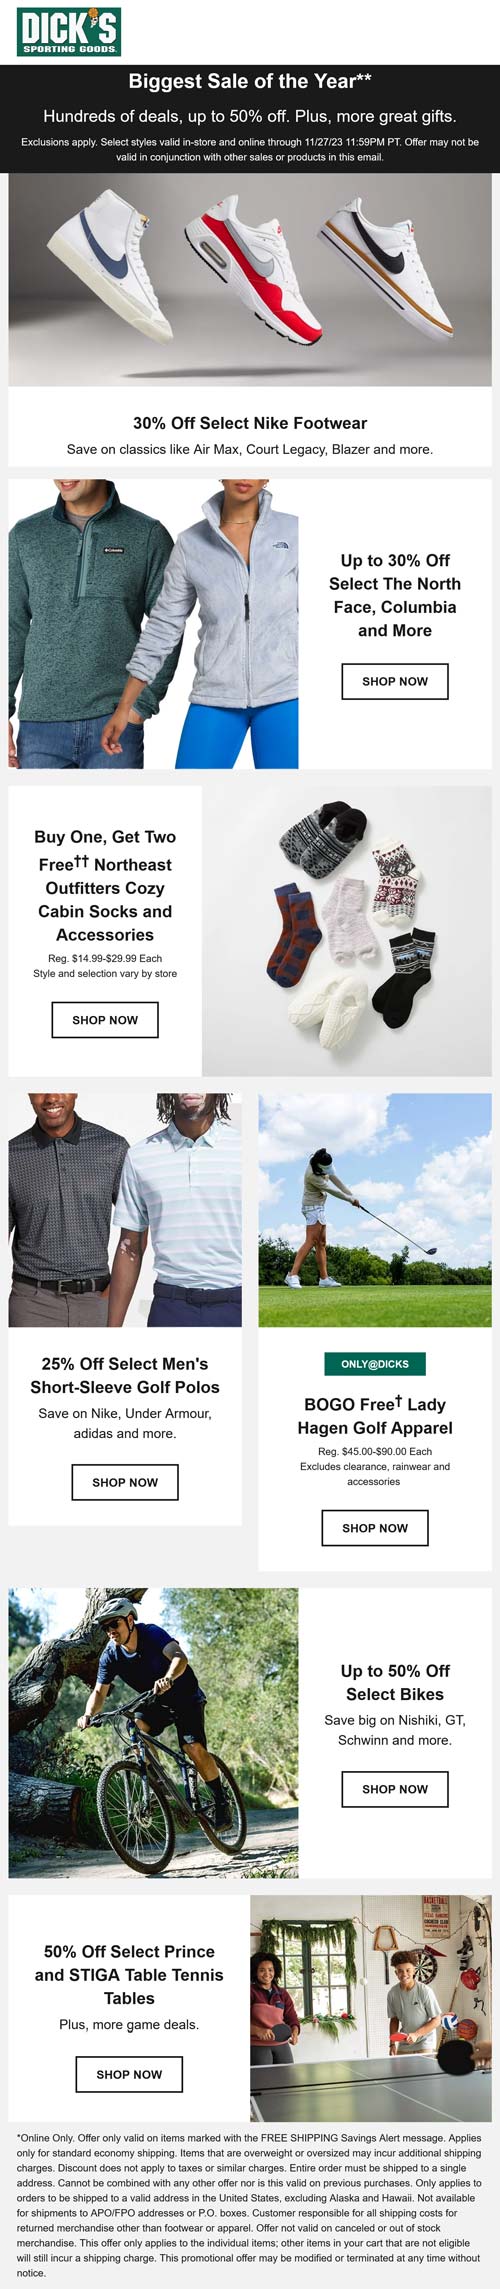 30% off Nike shoes, 50% off bikes, bogo golf apparel & more today at Dicks sporting goods #dicks